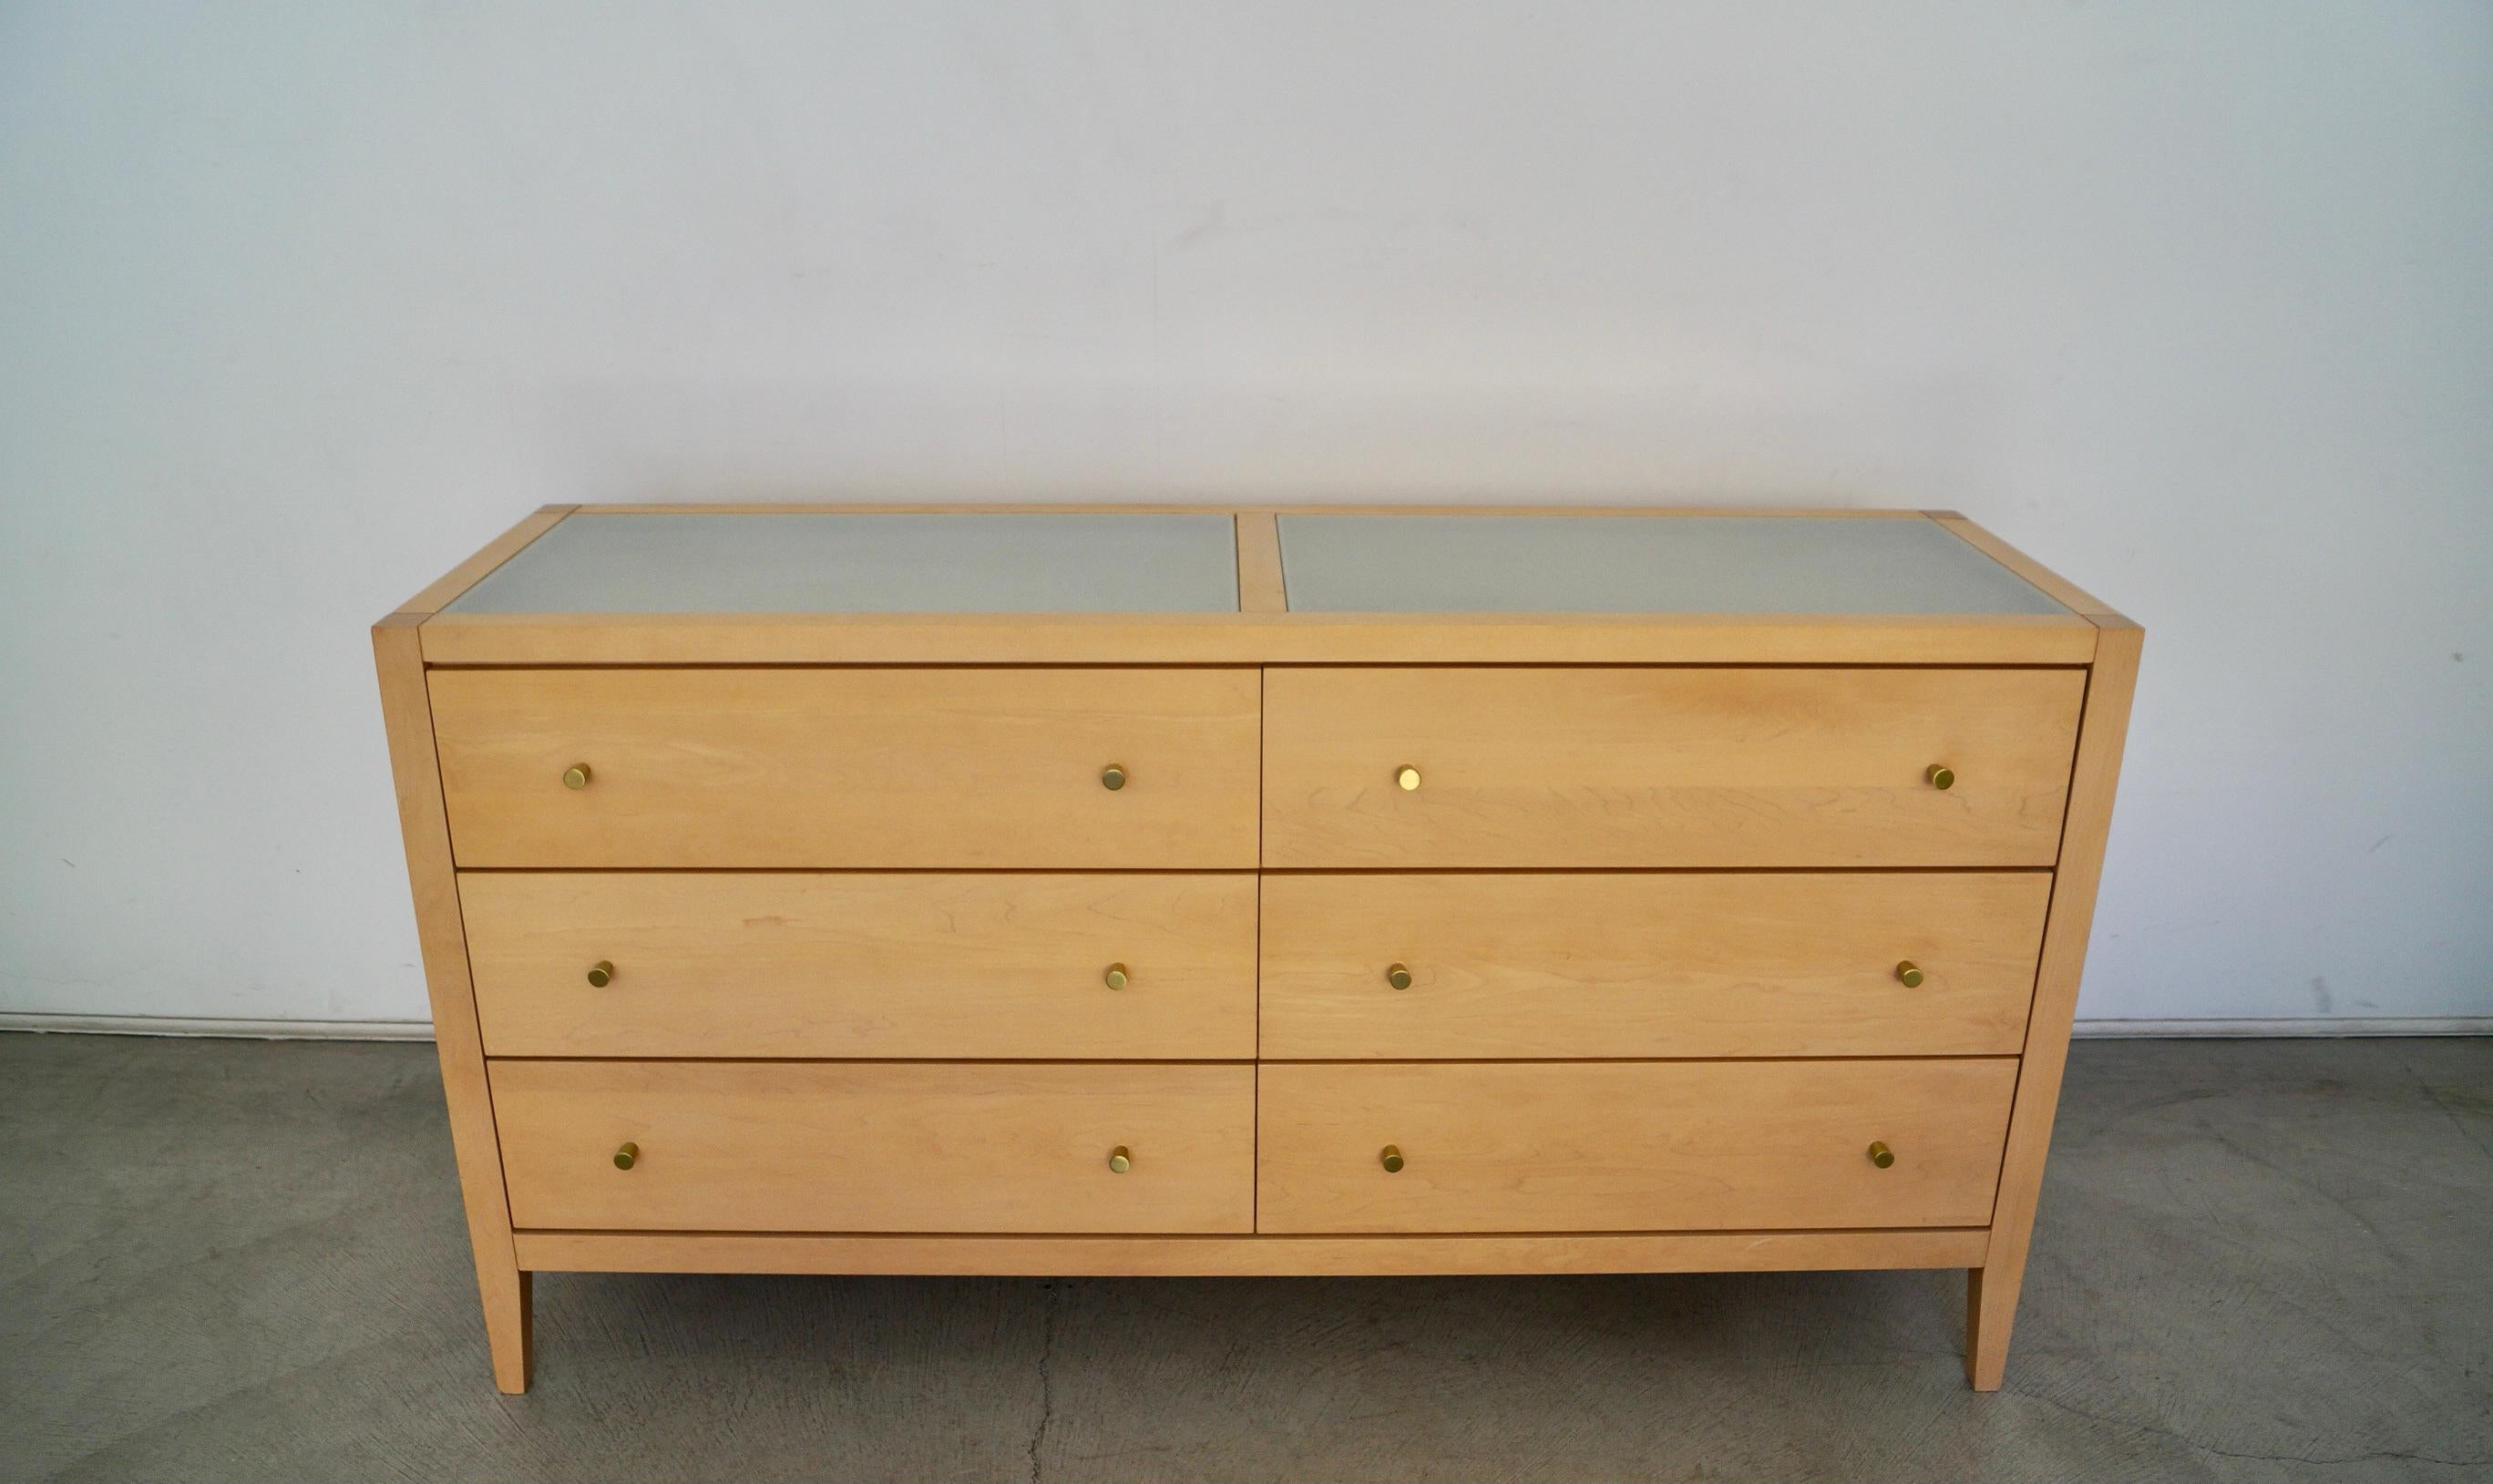 Vintage post-modern dresser for sale. Manufactured in 1998 by Baronet Furniture, and made in Canada. It's made of solid maple, and has two frosted glass inserts on the top. It has aluminum knobs in a brass finish. It's a really high-quality dresser